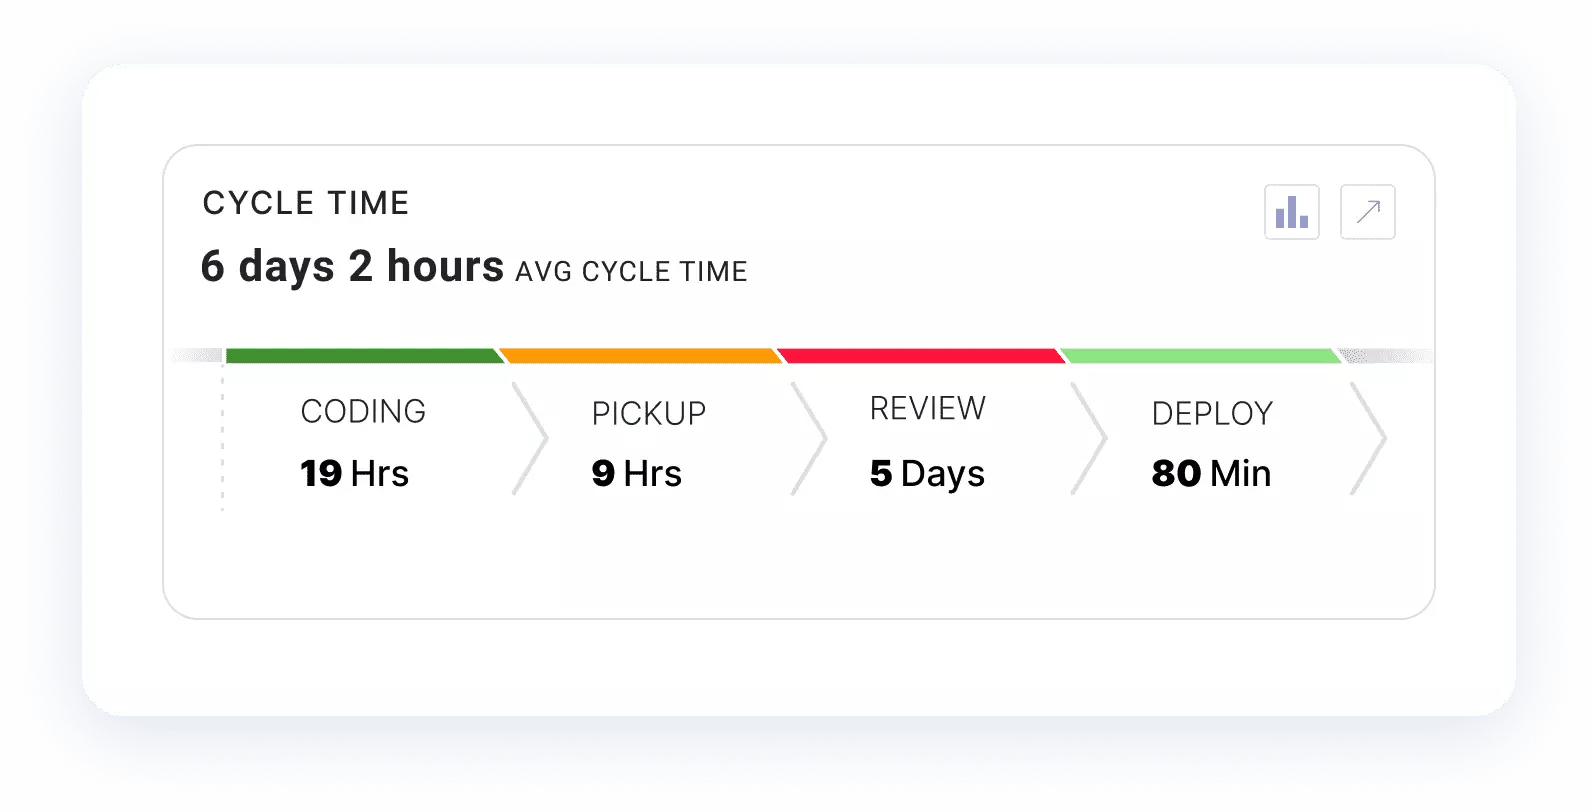 cycle time breakdown 6 days 2 hours